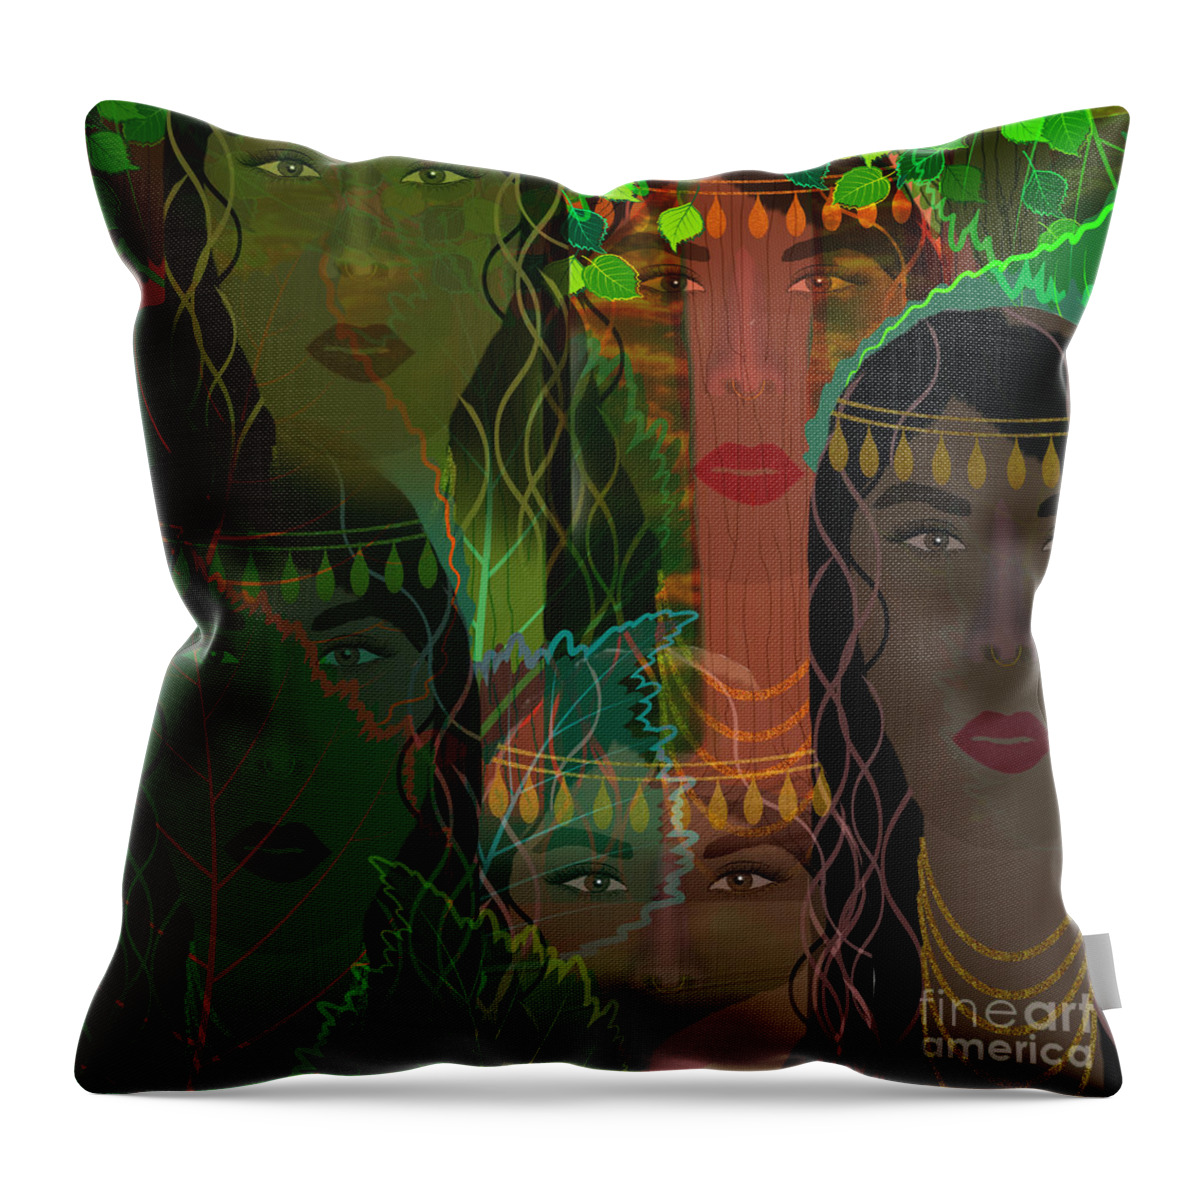 Woman Throw Pillow featuring the mixed media Windows Of Woman by Diamante Lavendar